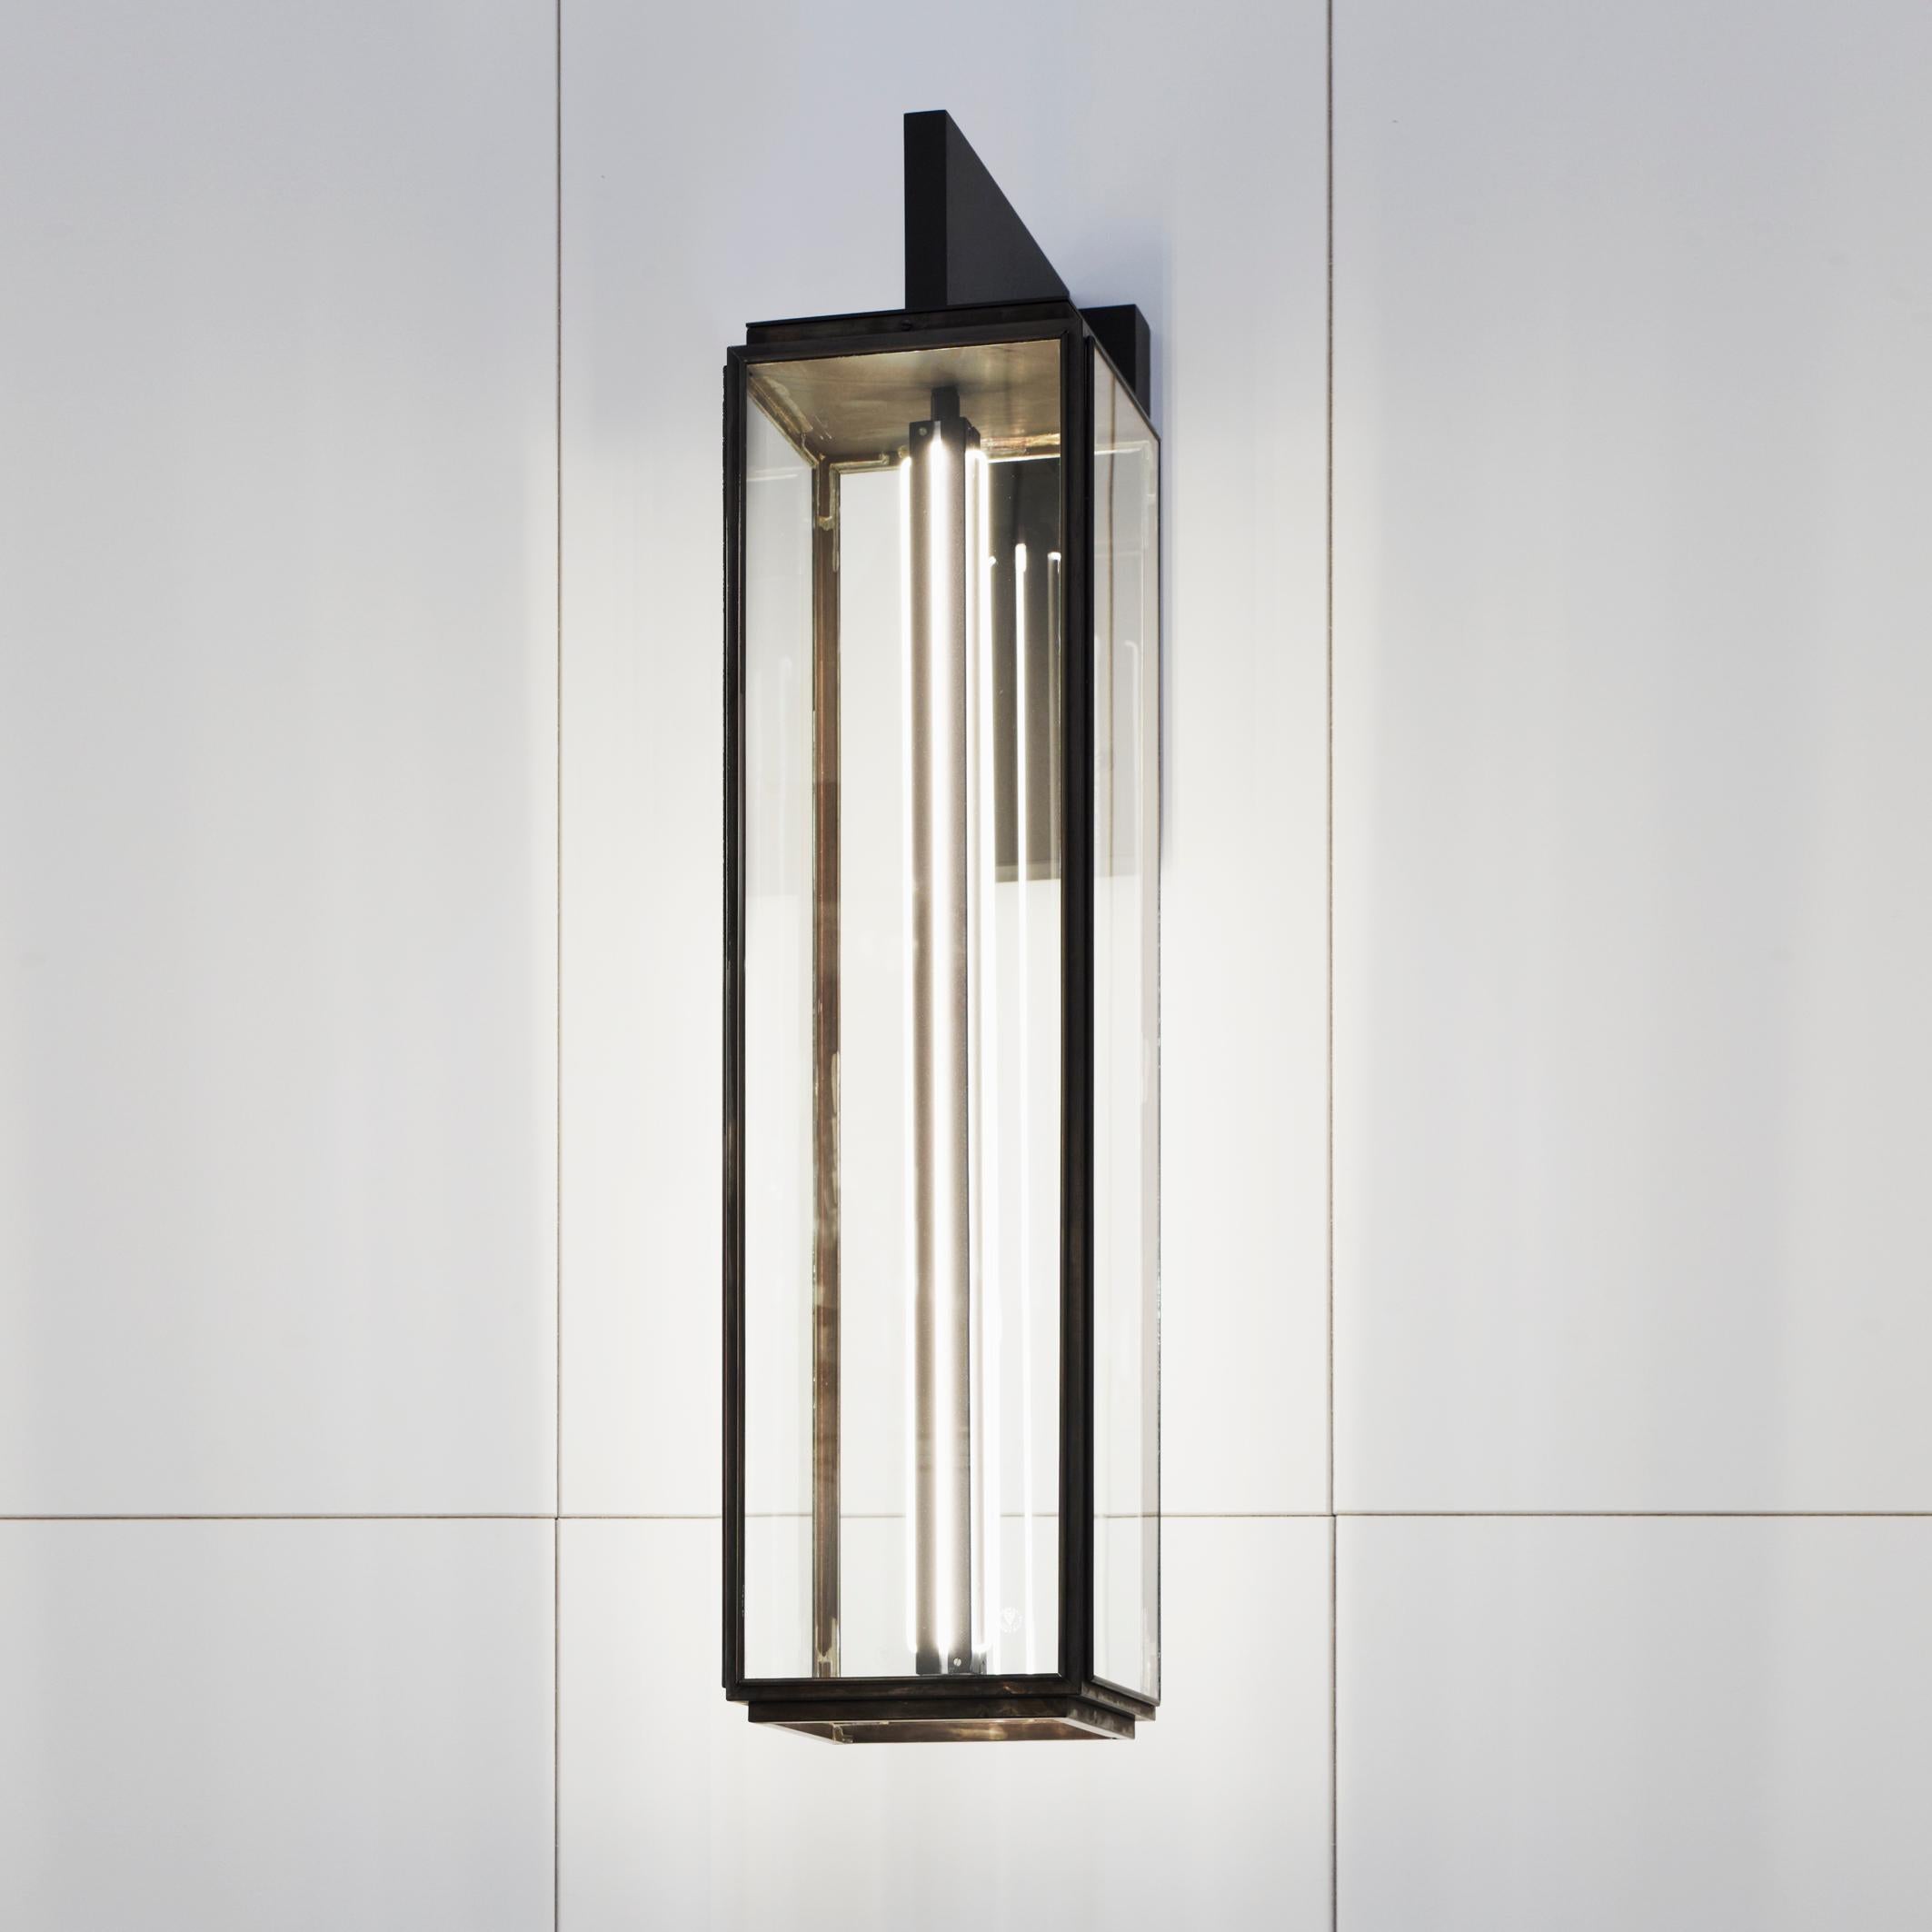 Eclectic wall light in dark bronze with outside fitted clear glass, closed top and open bottom. Wall bracket in bronze lacquered inox with forcible arm. Central lamp holder with four cold cathode lamps. For indoor use only (IP20).

Lamp cold